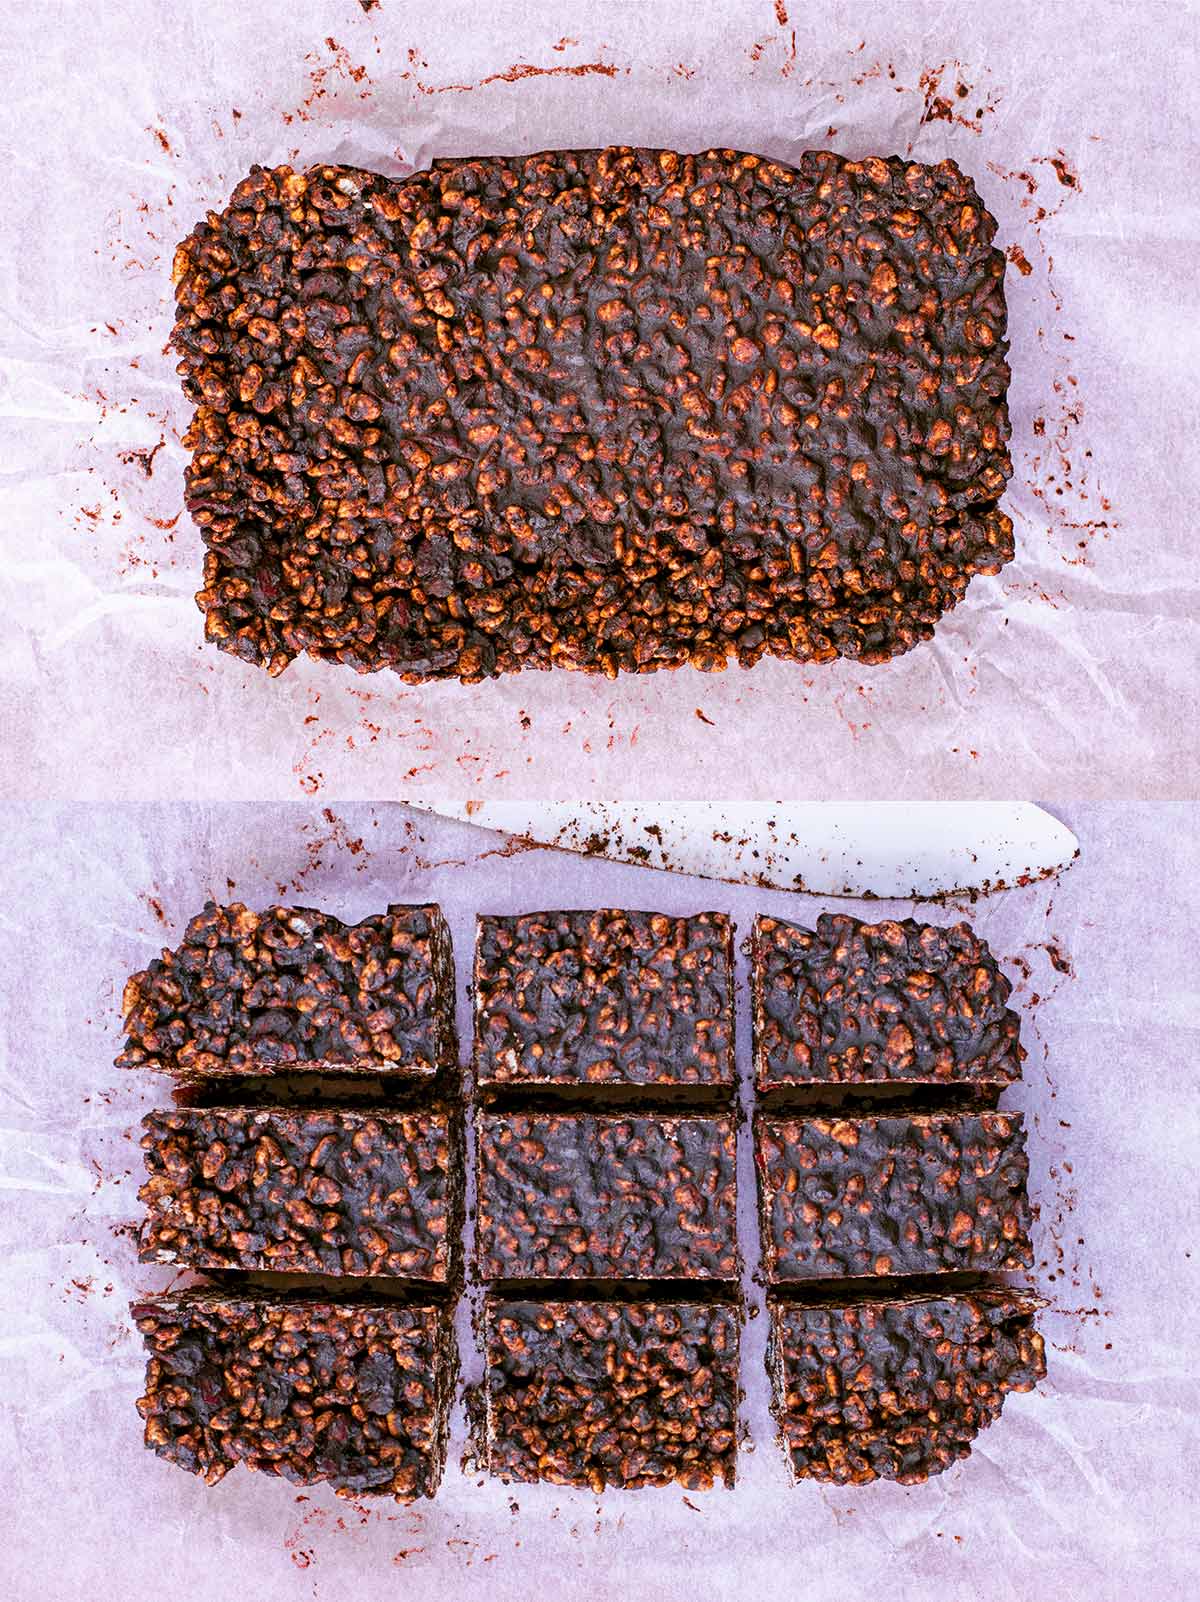 Two shot collage of the chilled tray of mixture then it cut into nine bars.